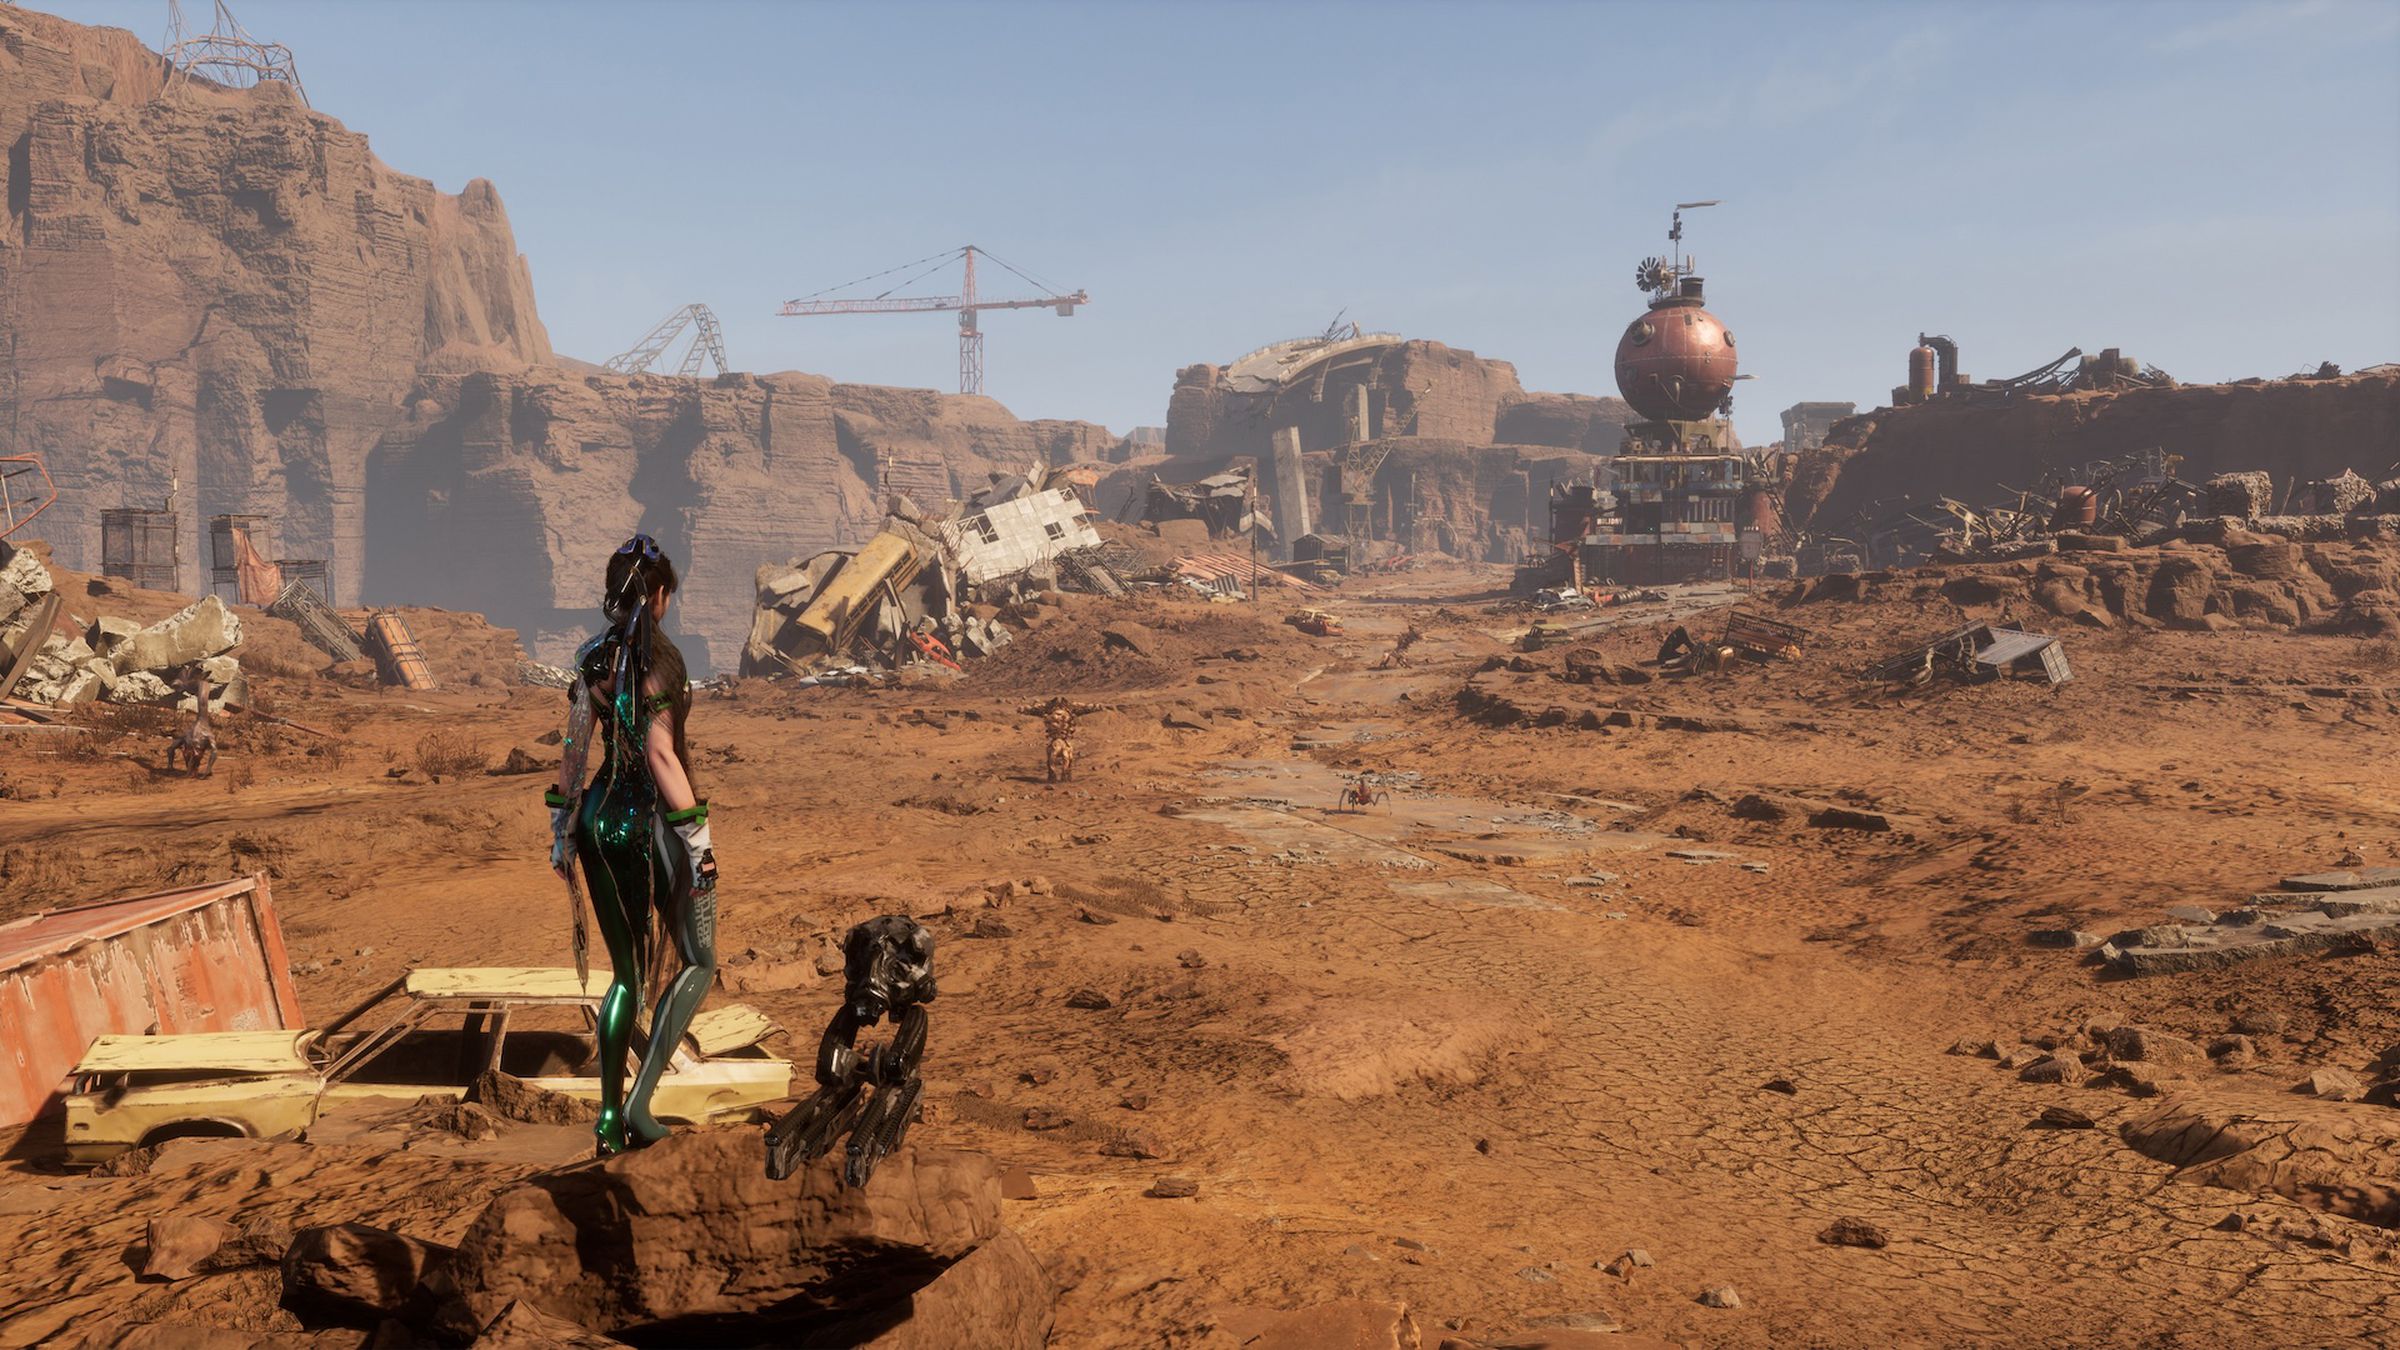 Screenshot from Stellar Blade featuring Eve surveying a vast desert littered with abandoned machinery and ruined infrastructure